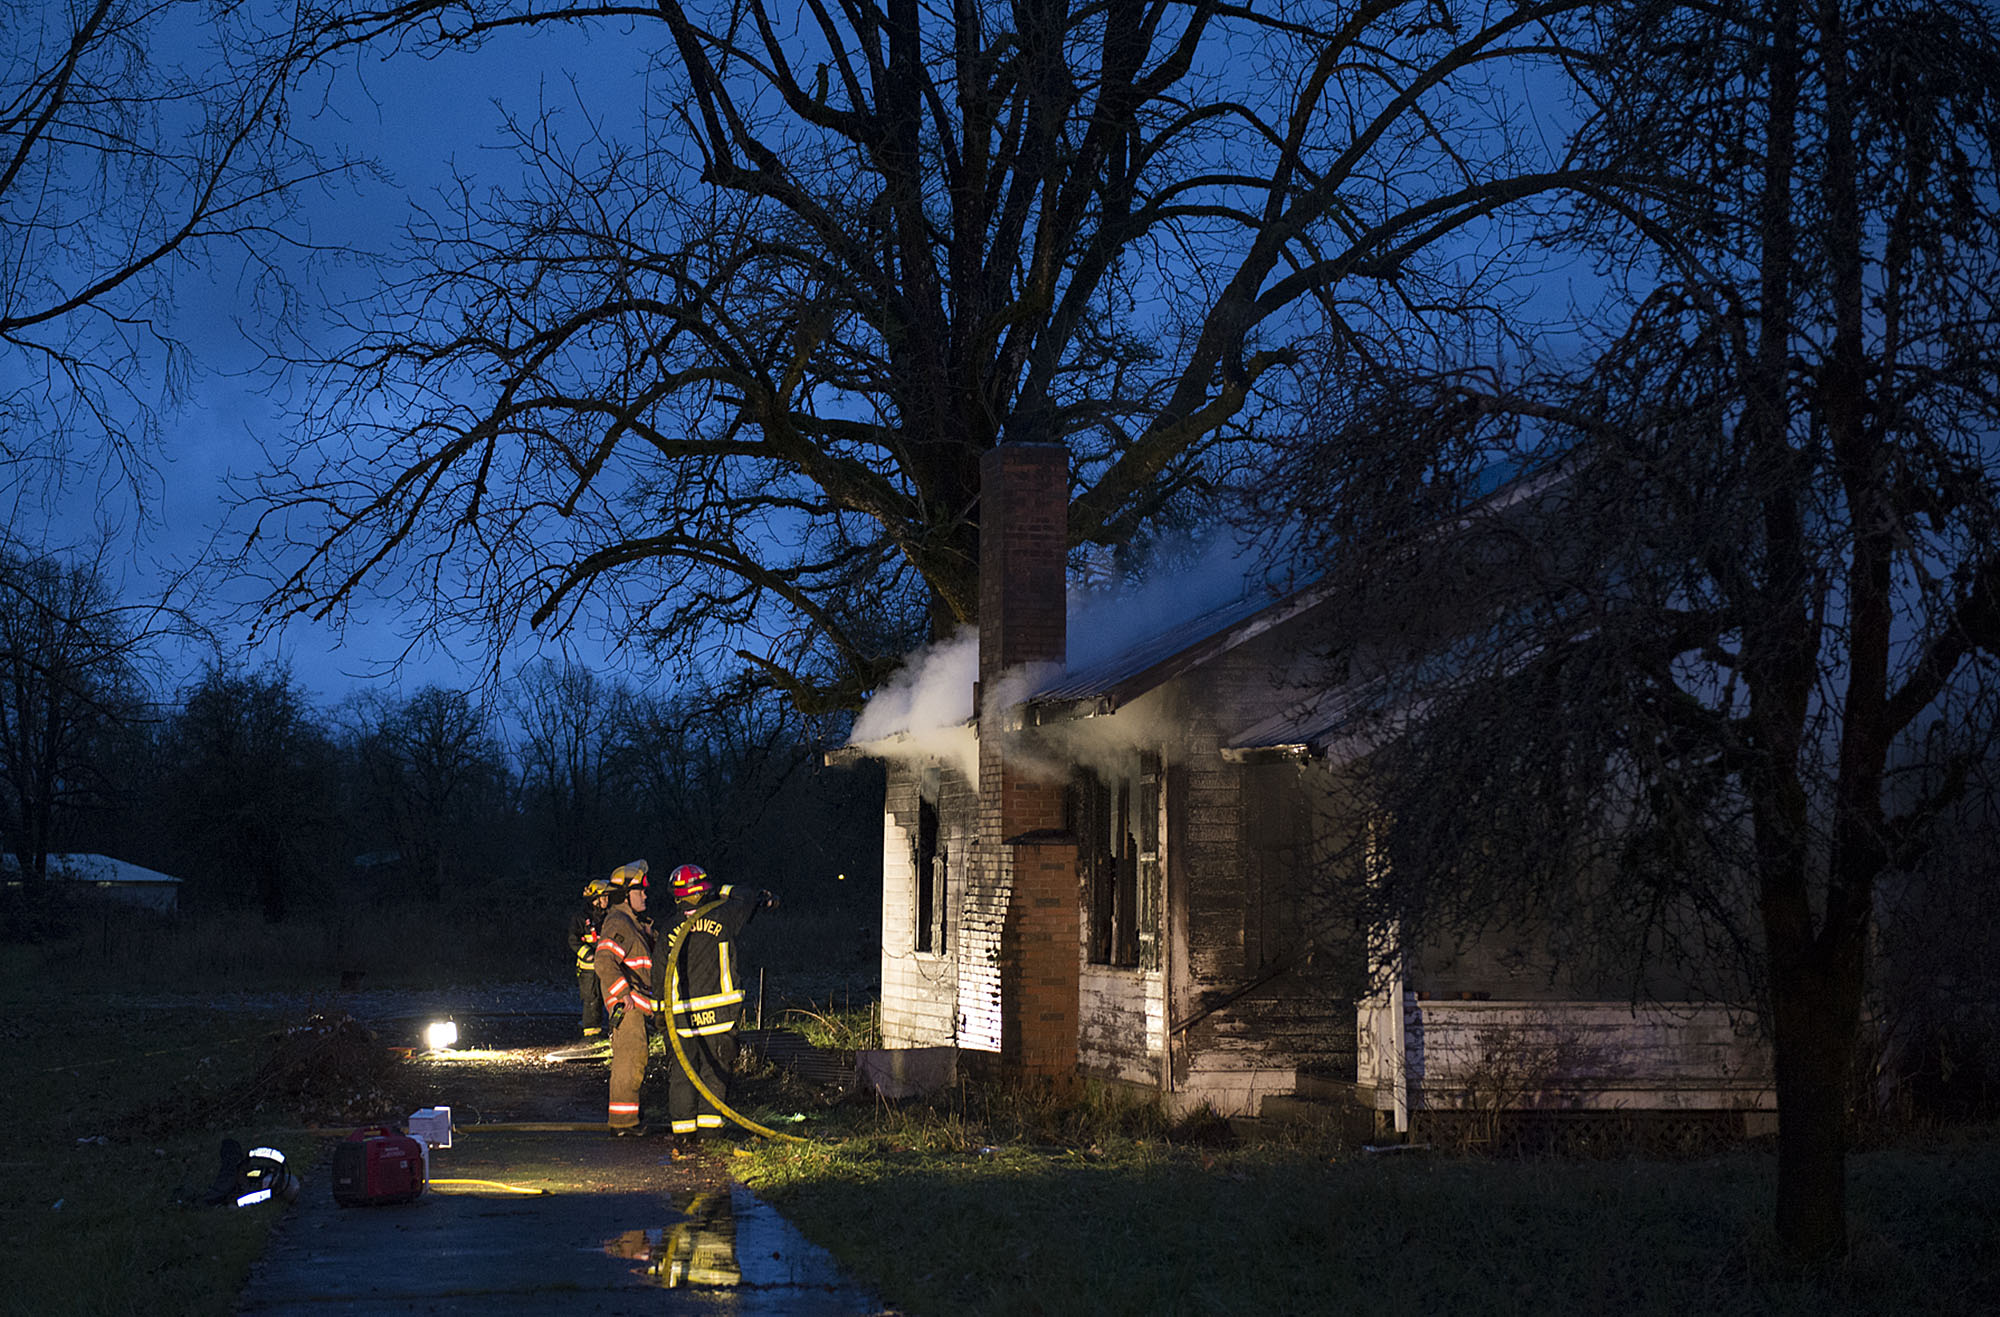 Firefighters respond at the scene of a structure fire Friday morning, Dec. 4, 2015 at 18014 N.E. Fourth Plain Boulevard.